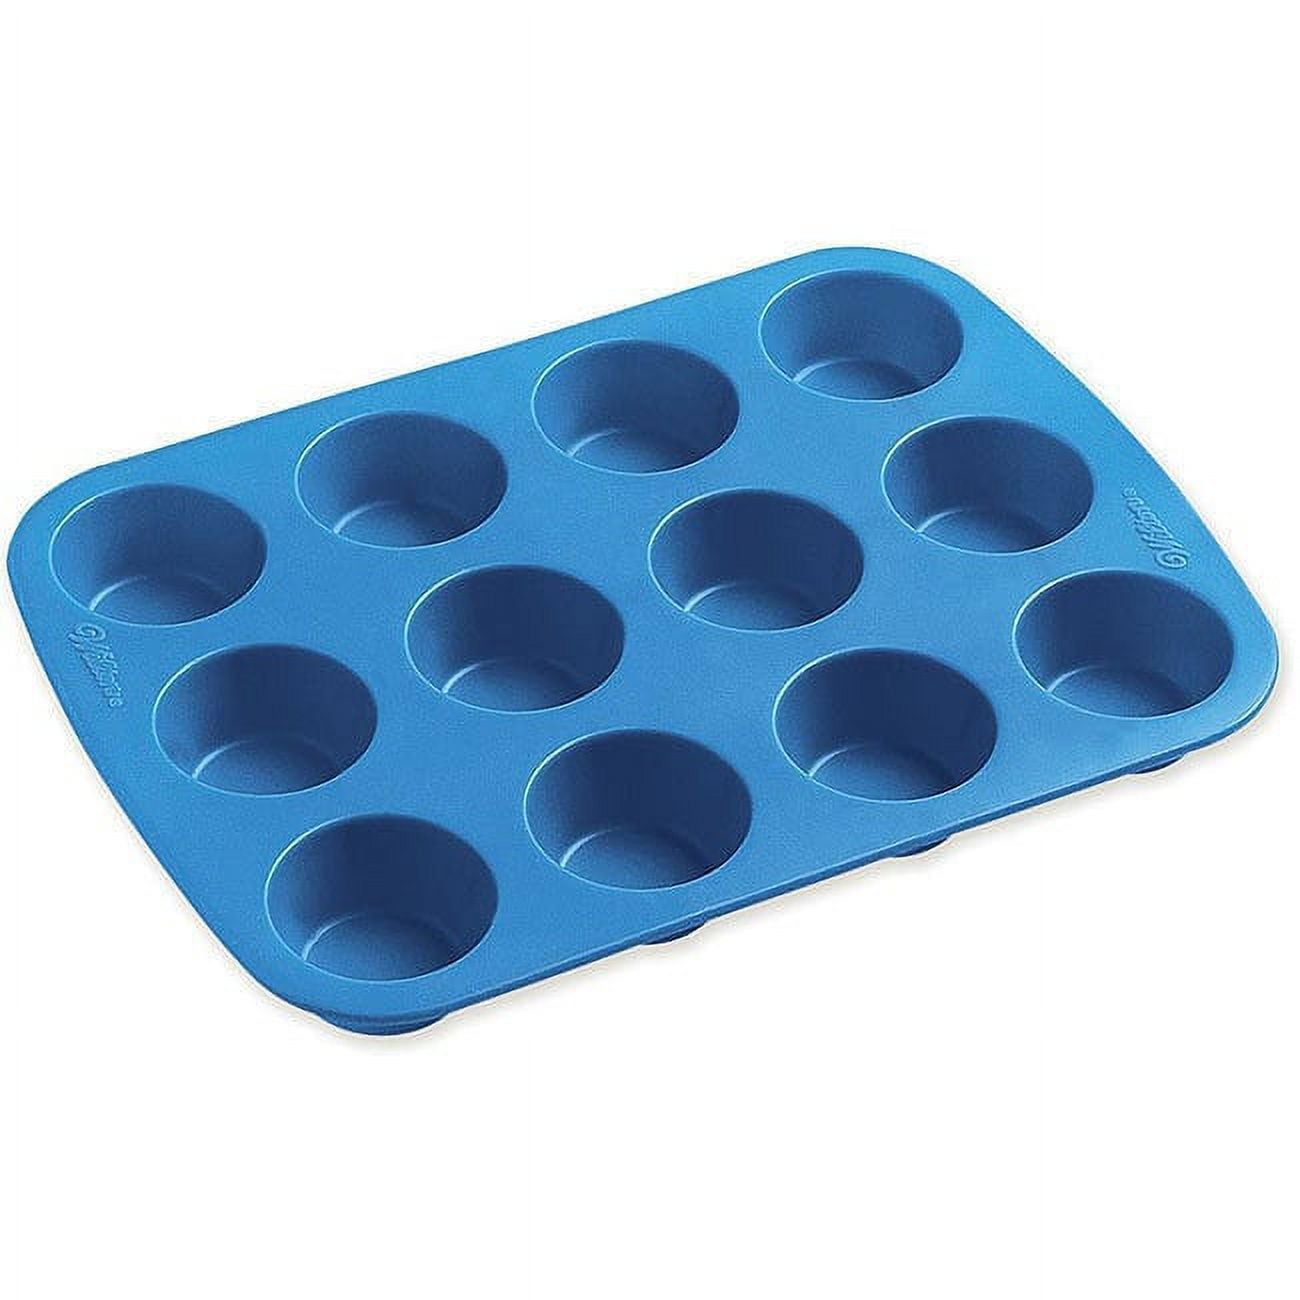 JEEXI Silicone Mini Muffin Pan, 12-Cup Cake Non-Stick BPA-Free, Muffins  Tray, Silicone Baking Pan Mold for Small Cupcakes Muffins Brownies Pudding